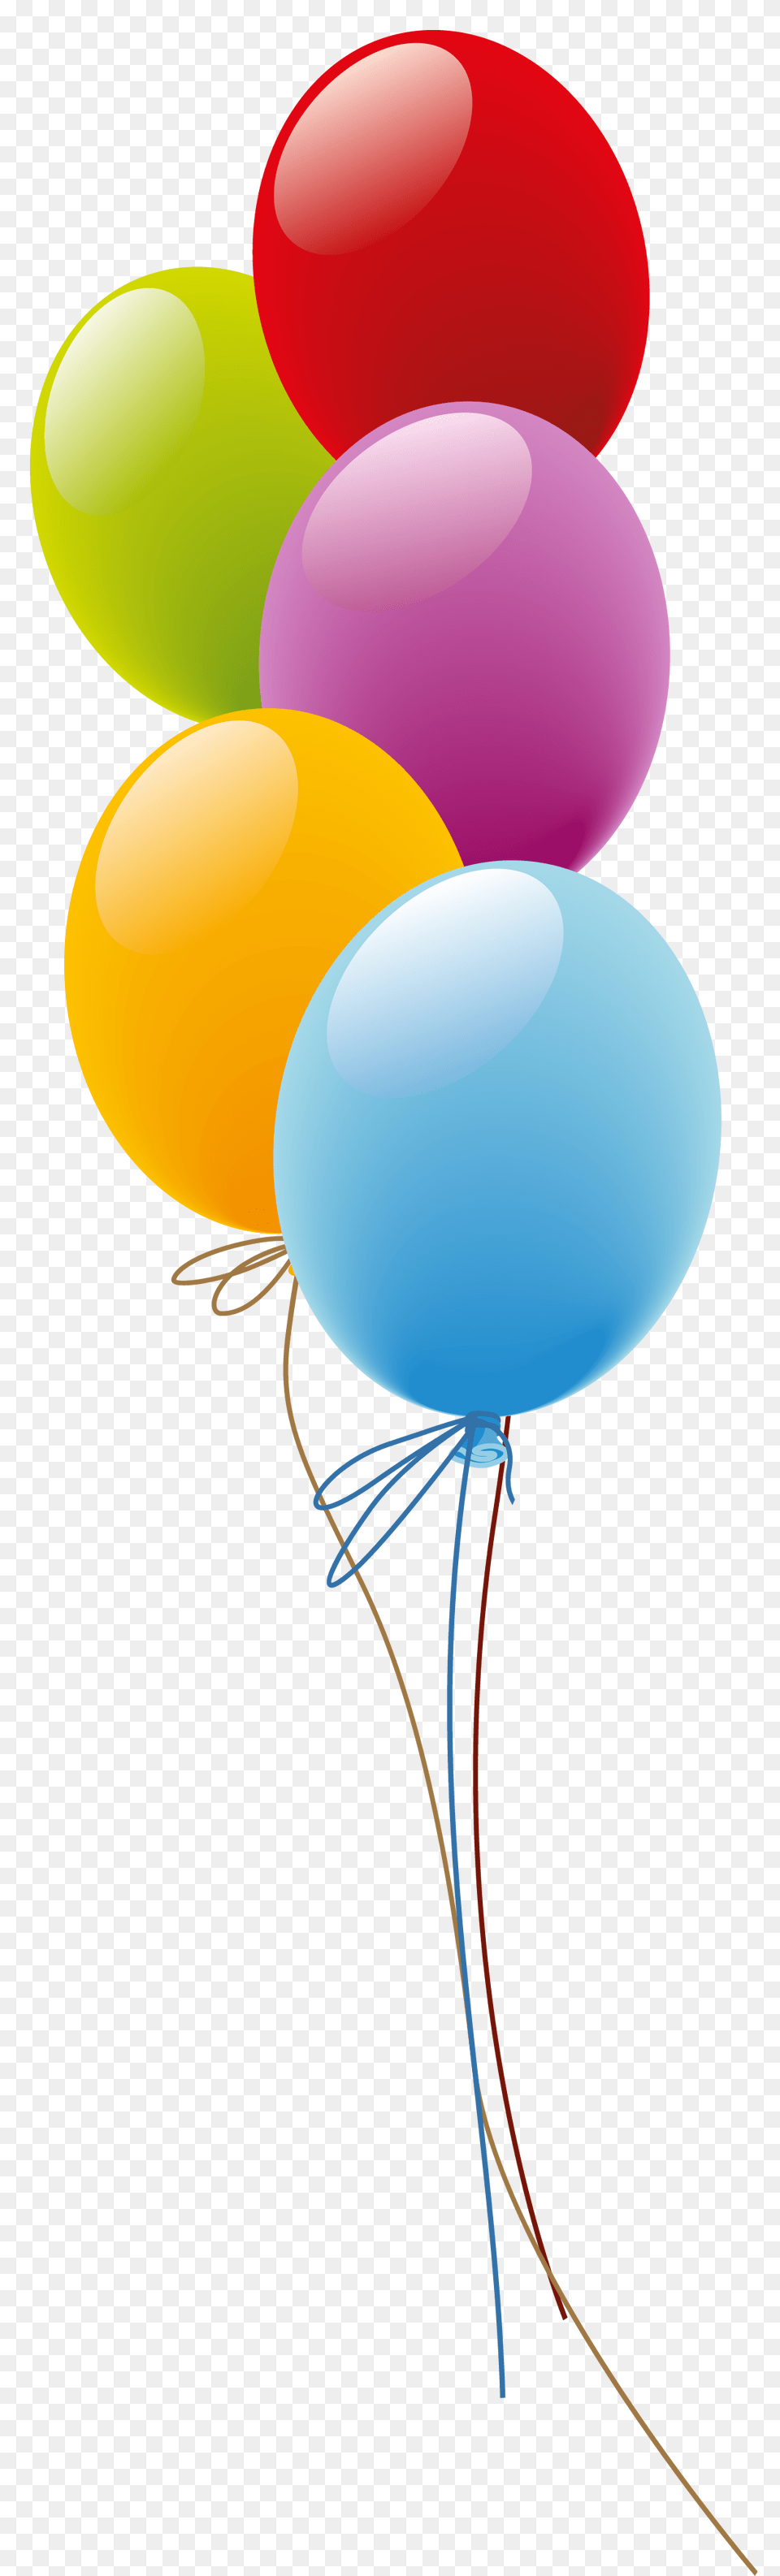 Balloons Confetti Clip Art Clipart Mail Balloon Png Image